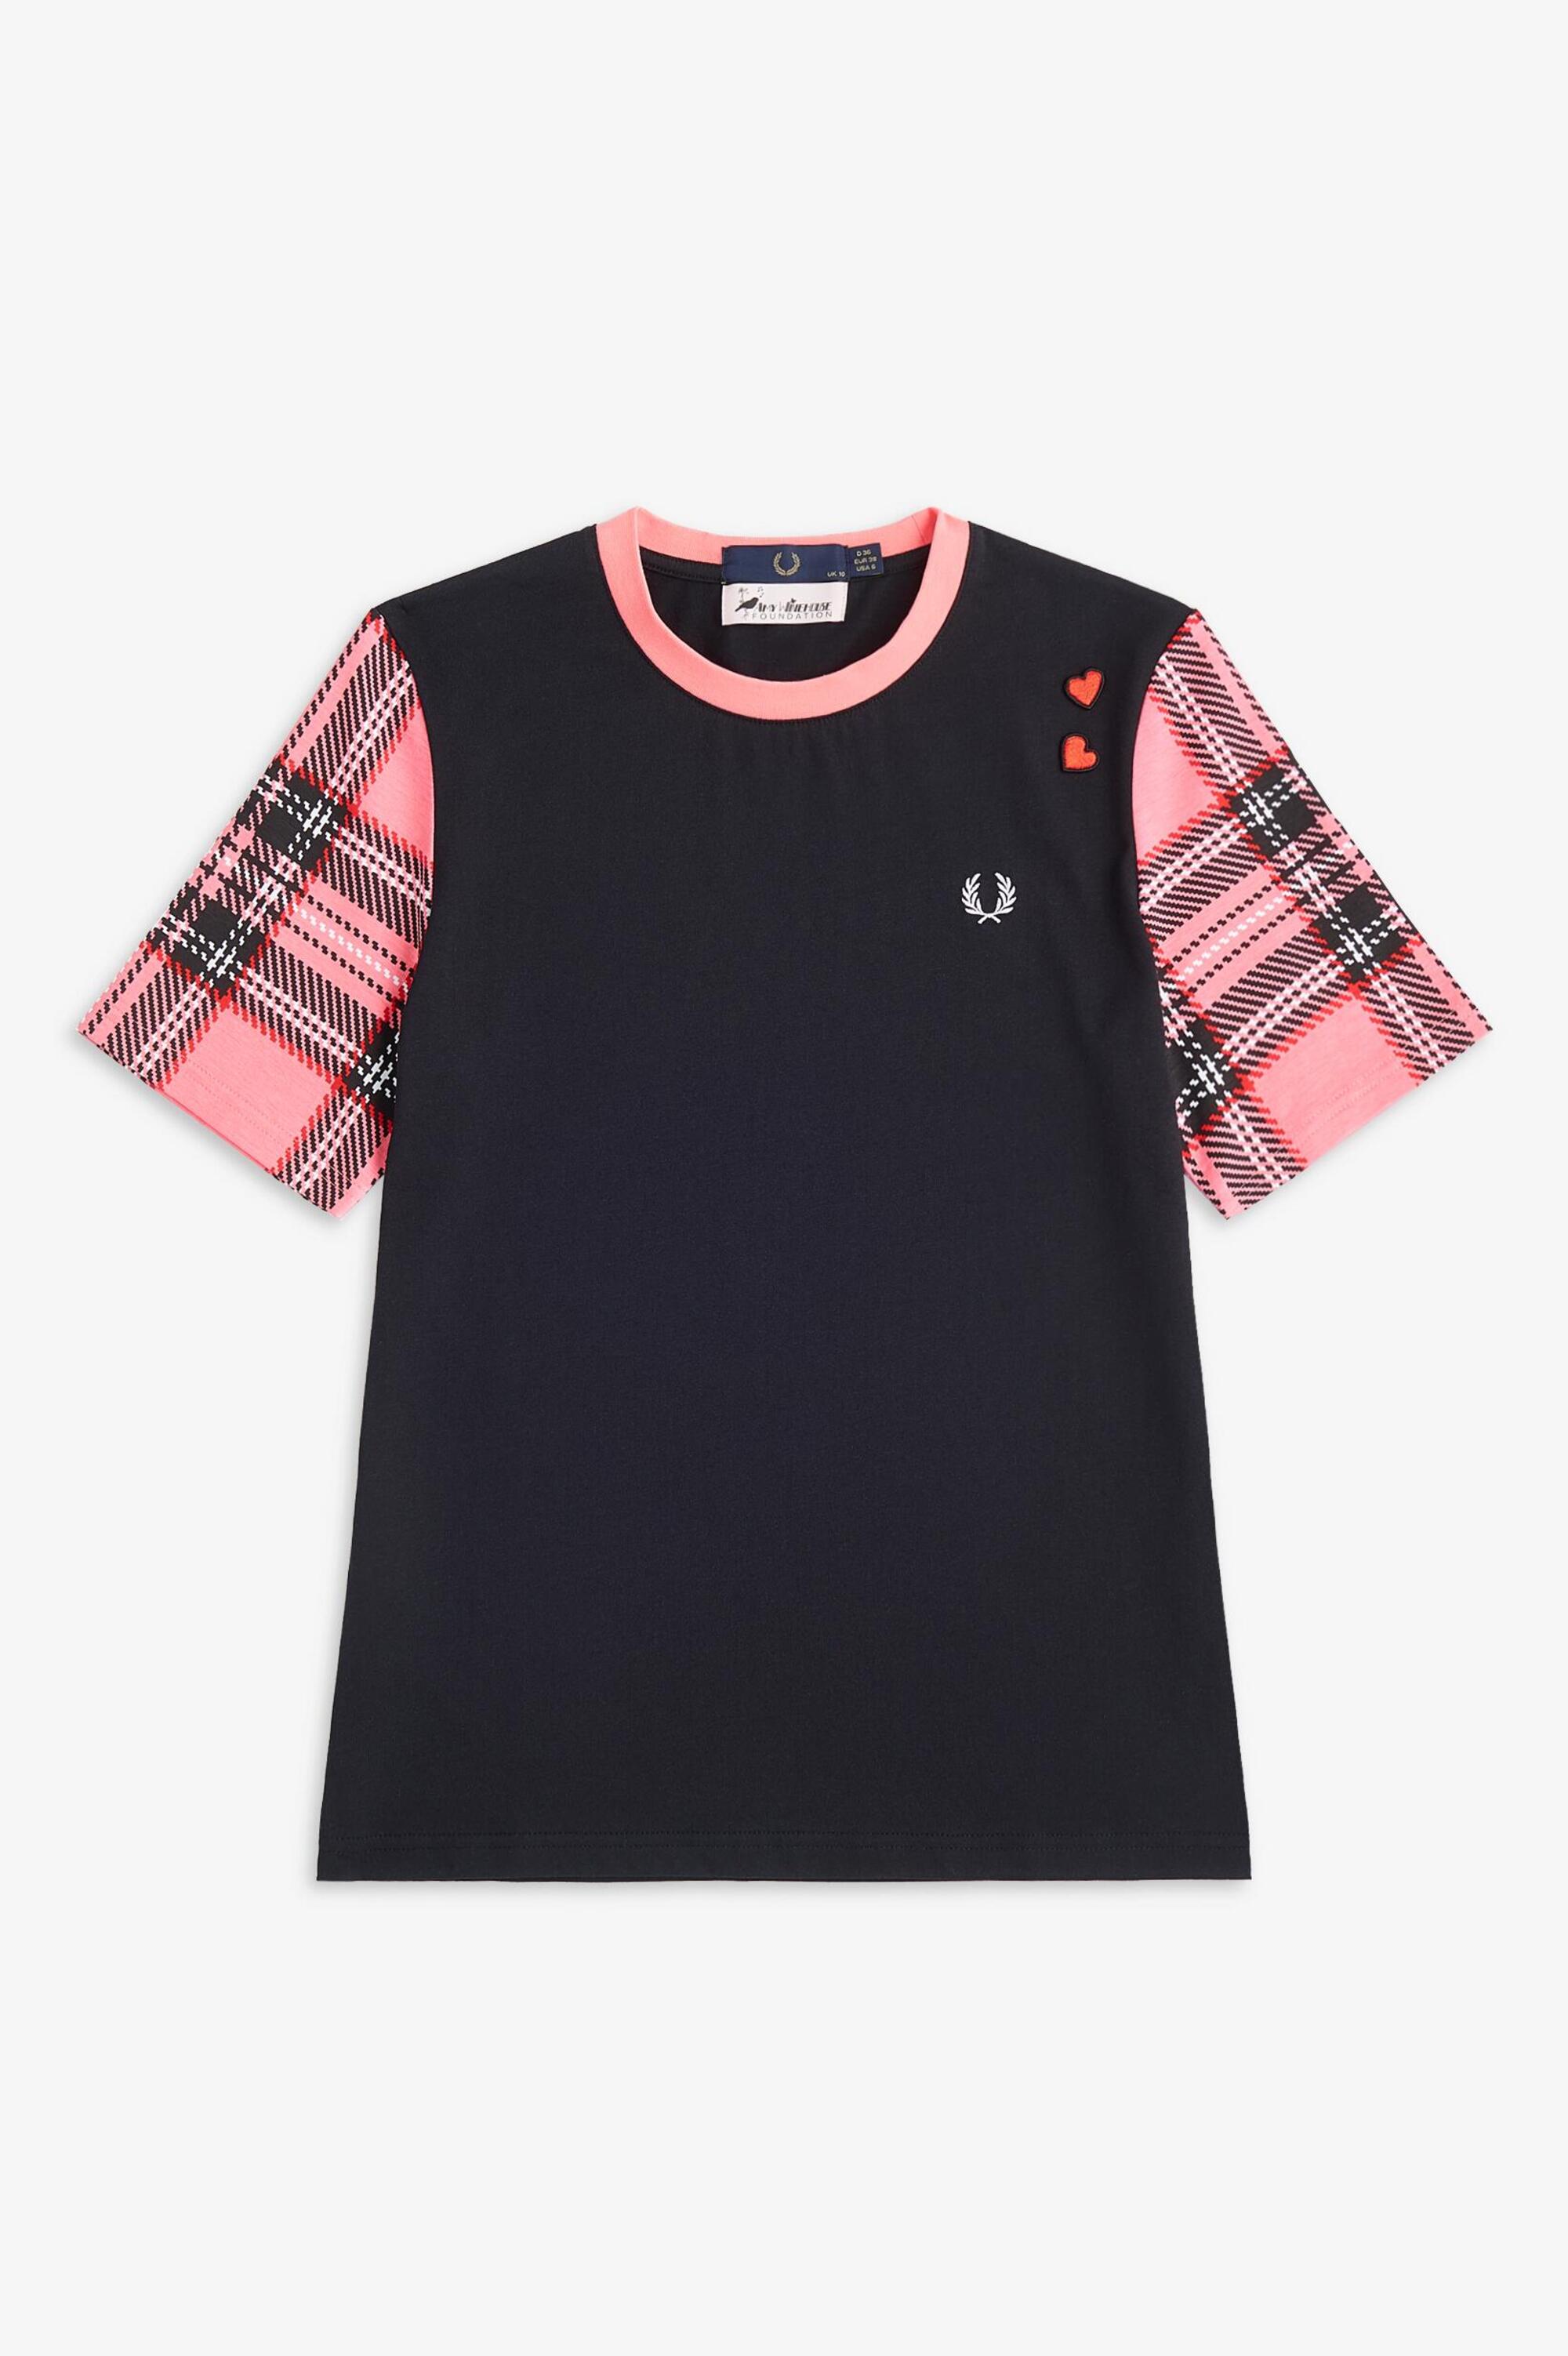 Fred perry x AmyWinehouse t-shirt